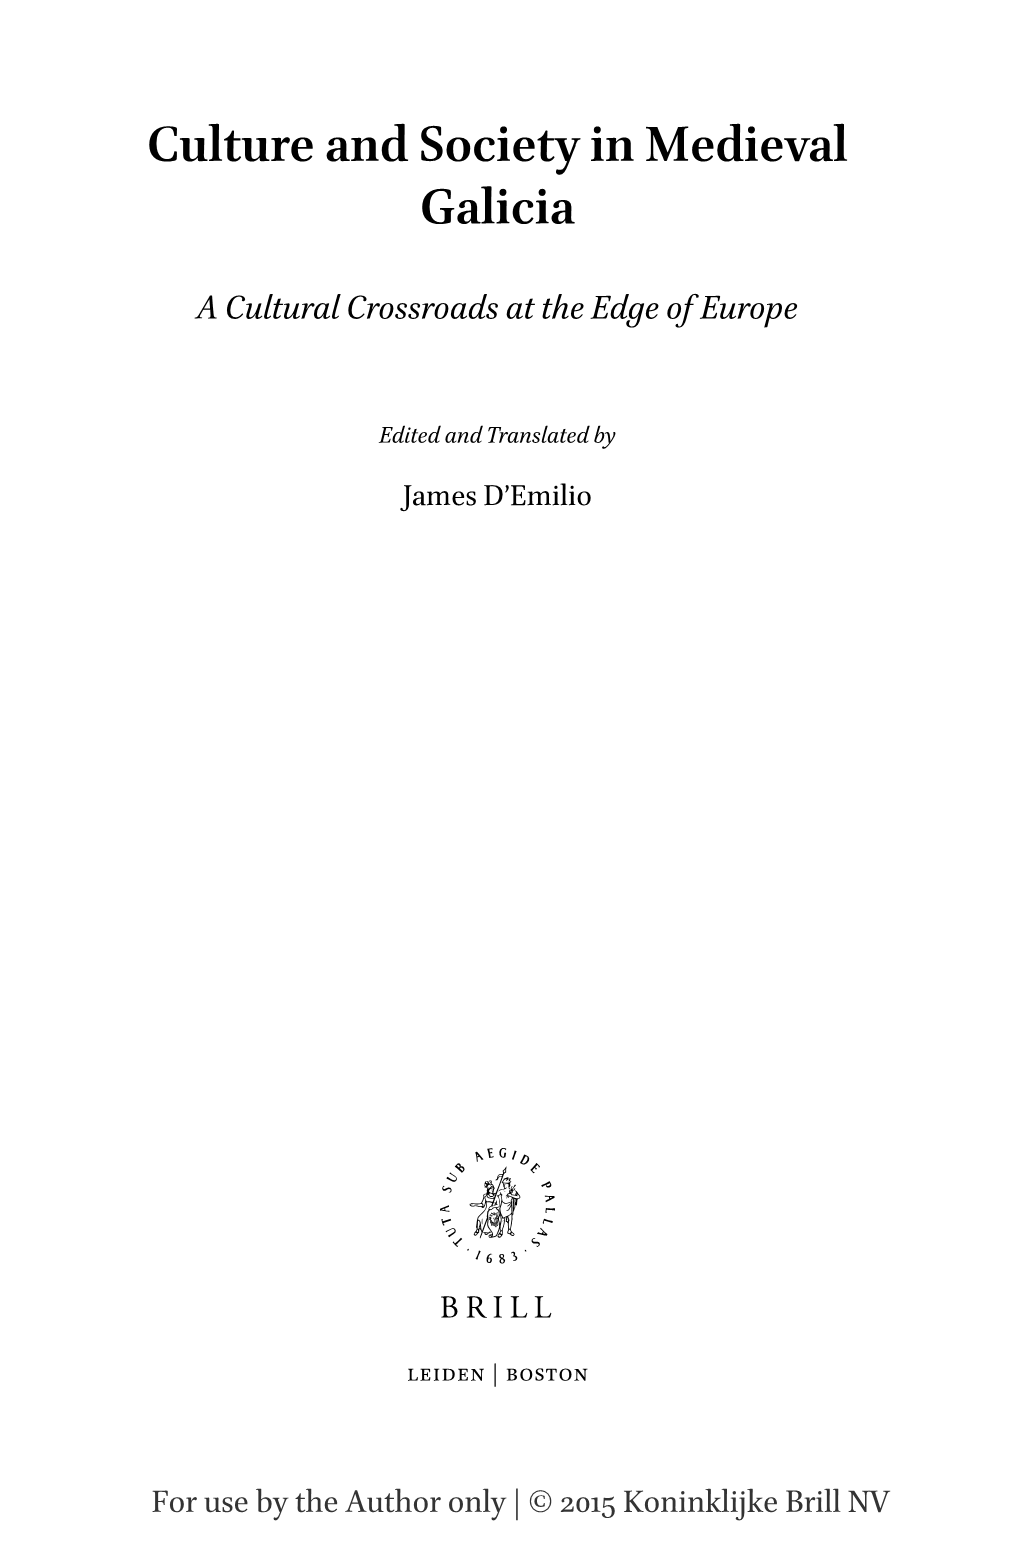 Culture and Society in Medieval Galicia